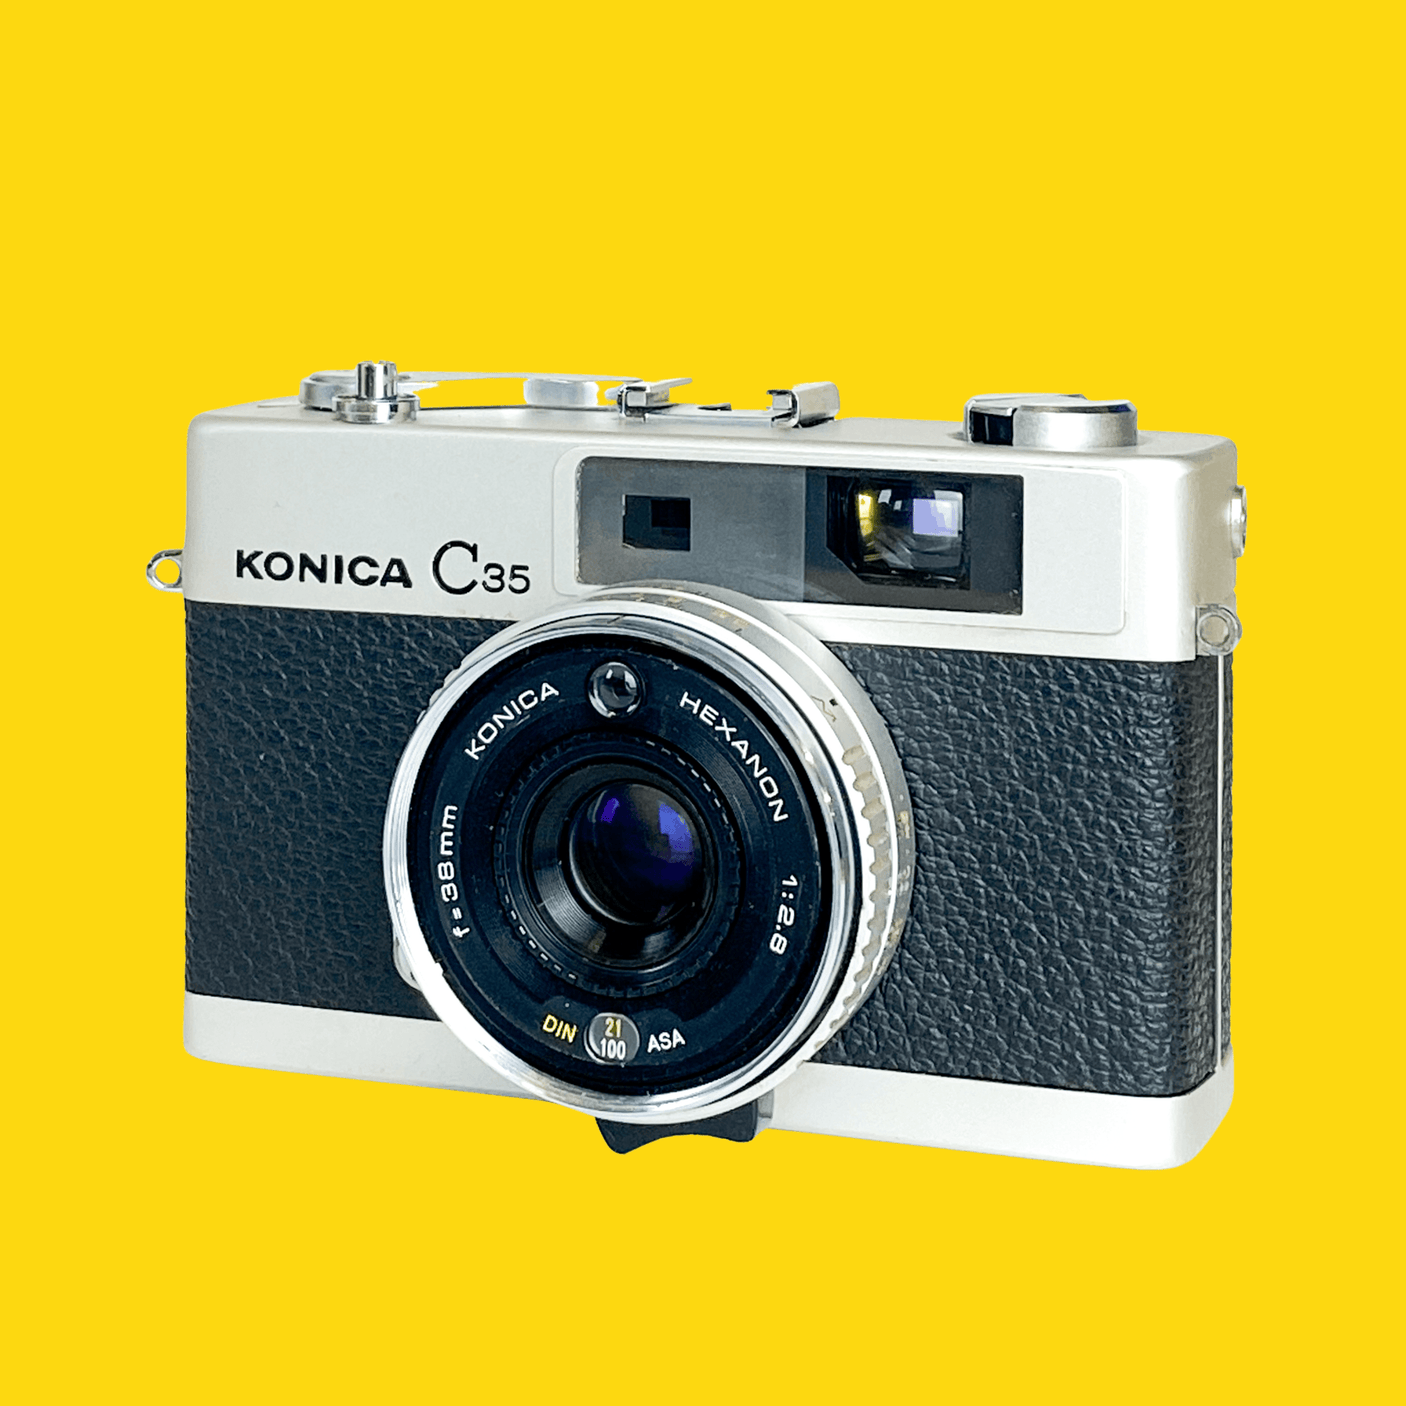 Konica C35 35mm Point and Shoot Film Camera.